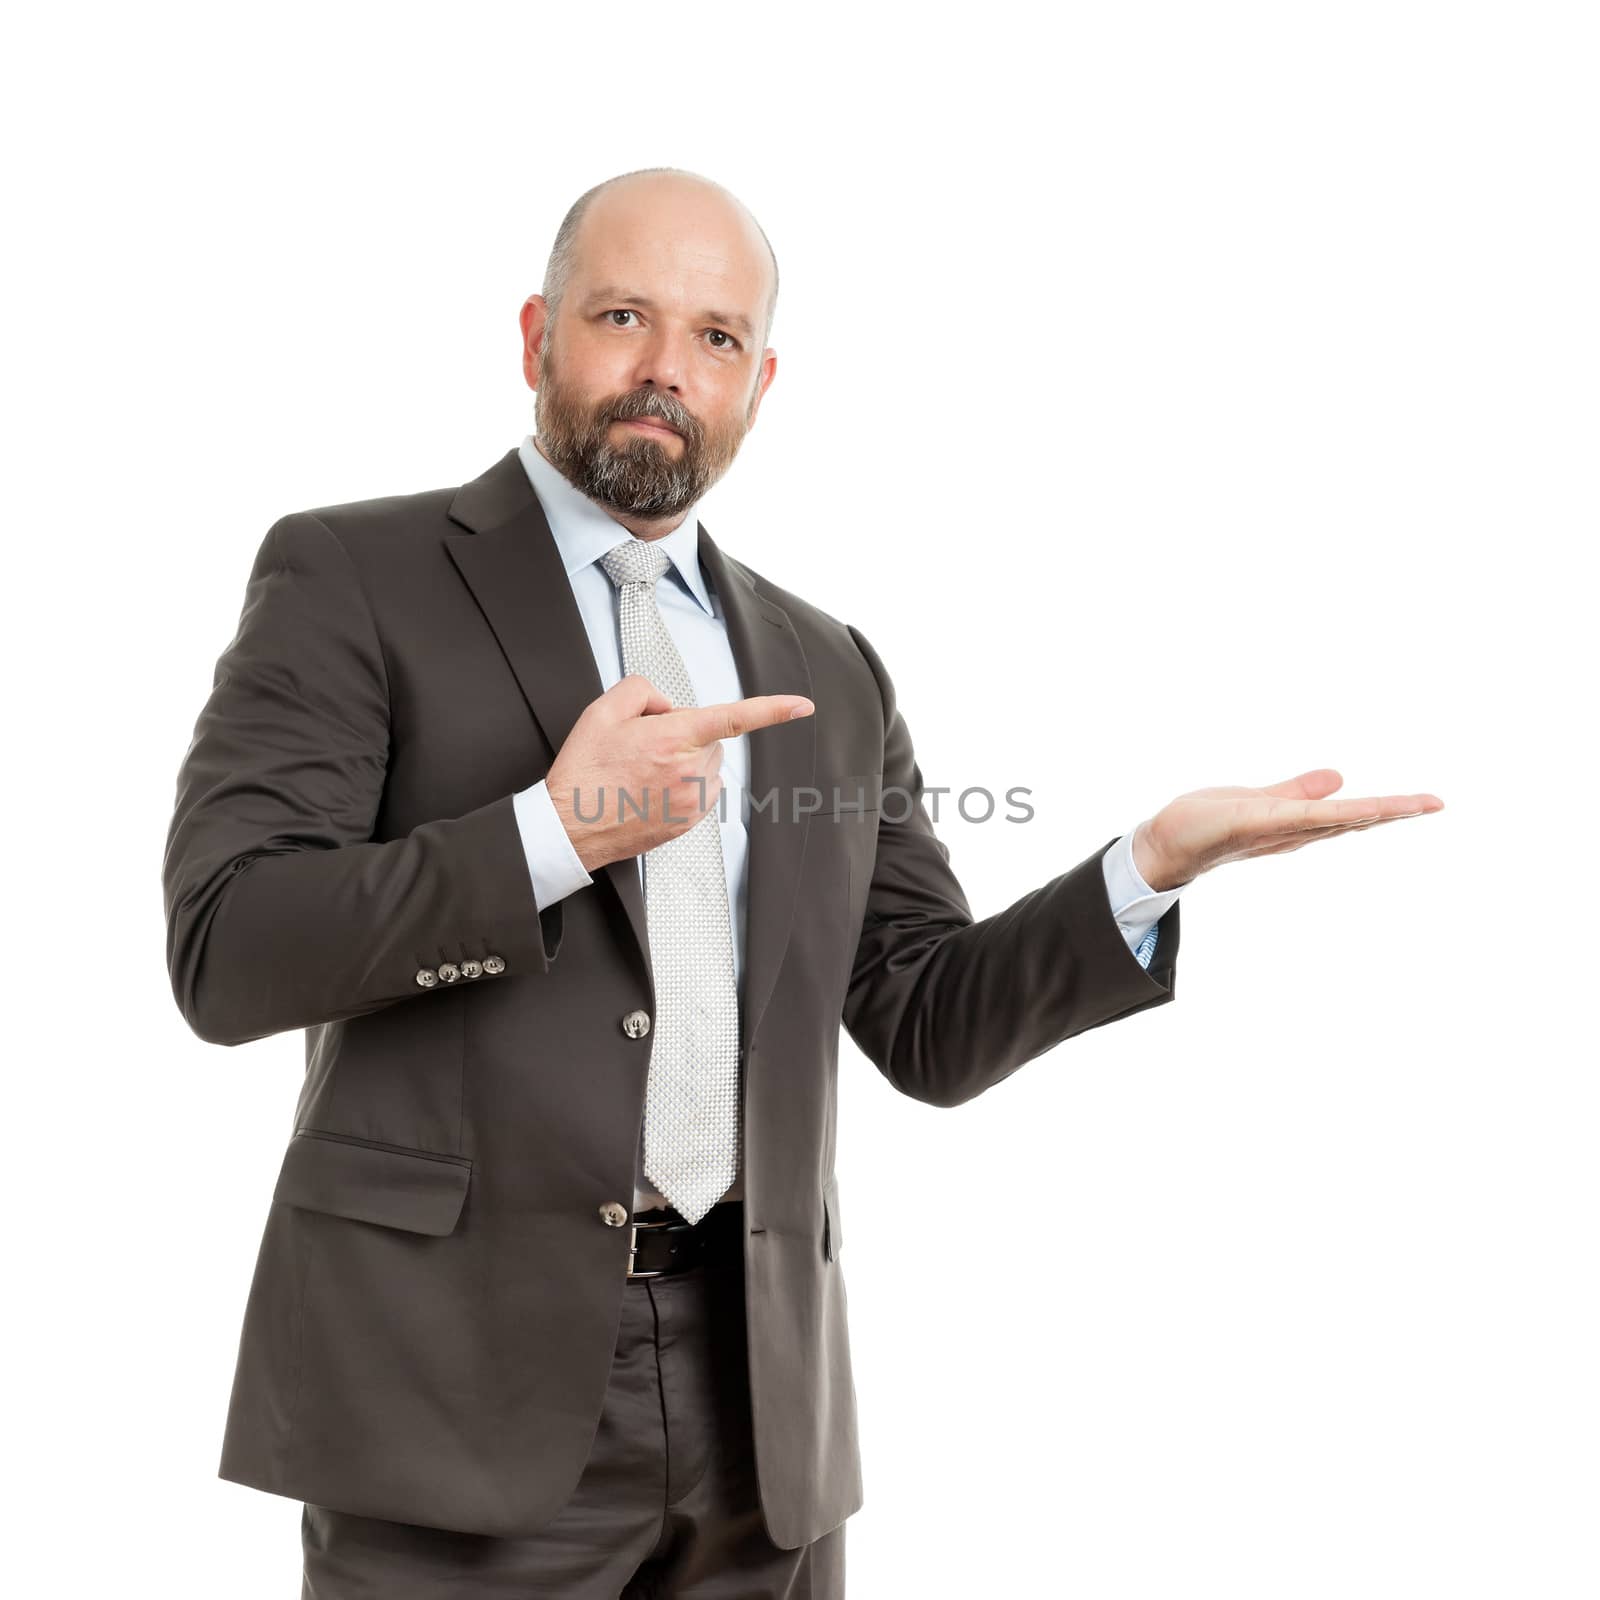 An image of a handsome business man pointing